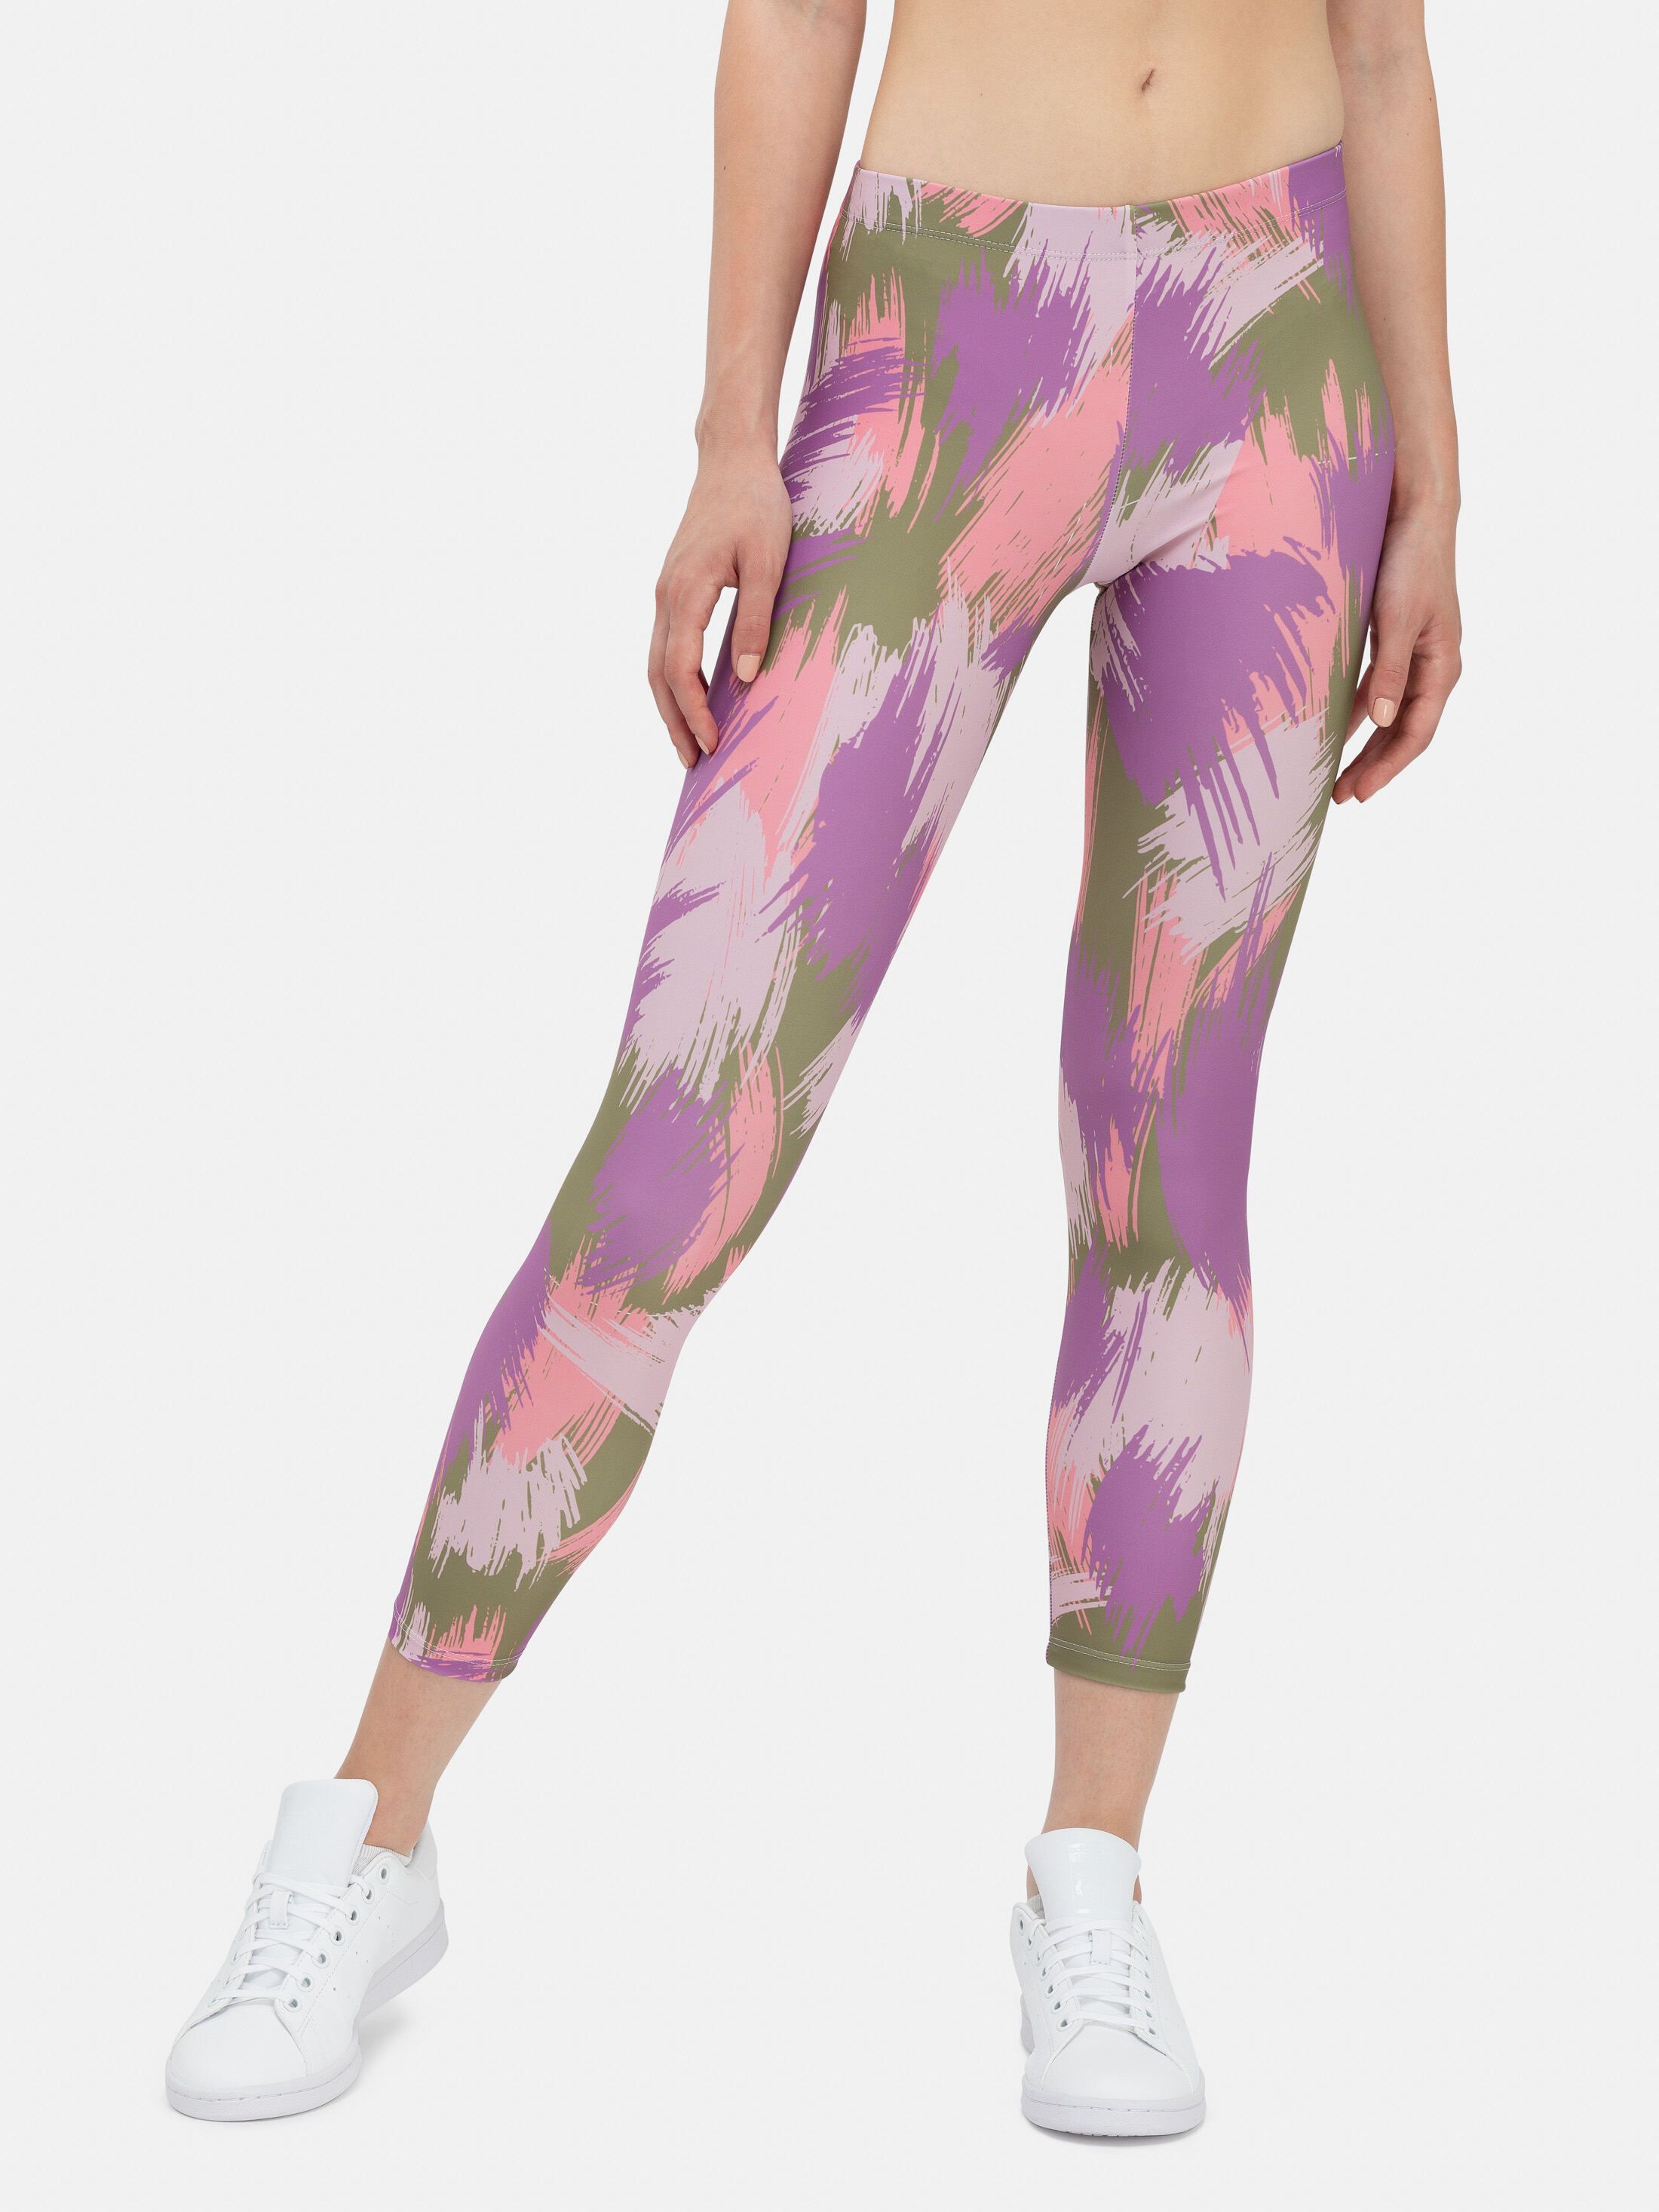 Draft and Make Your Own Leggings 